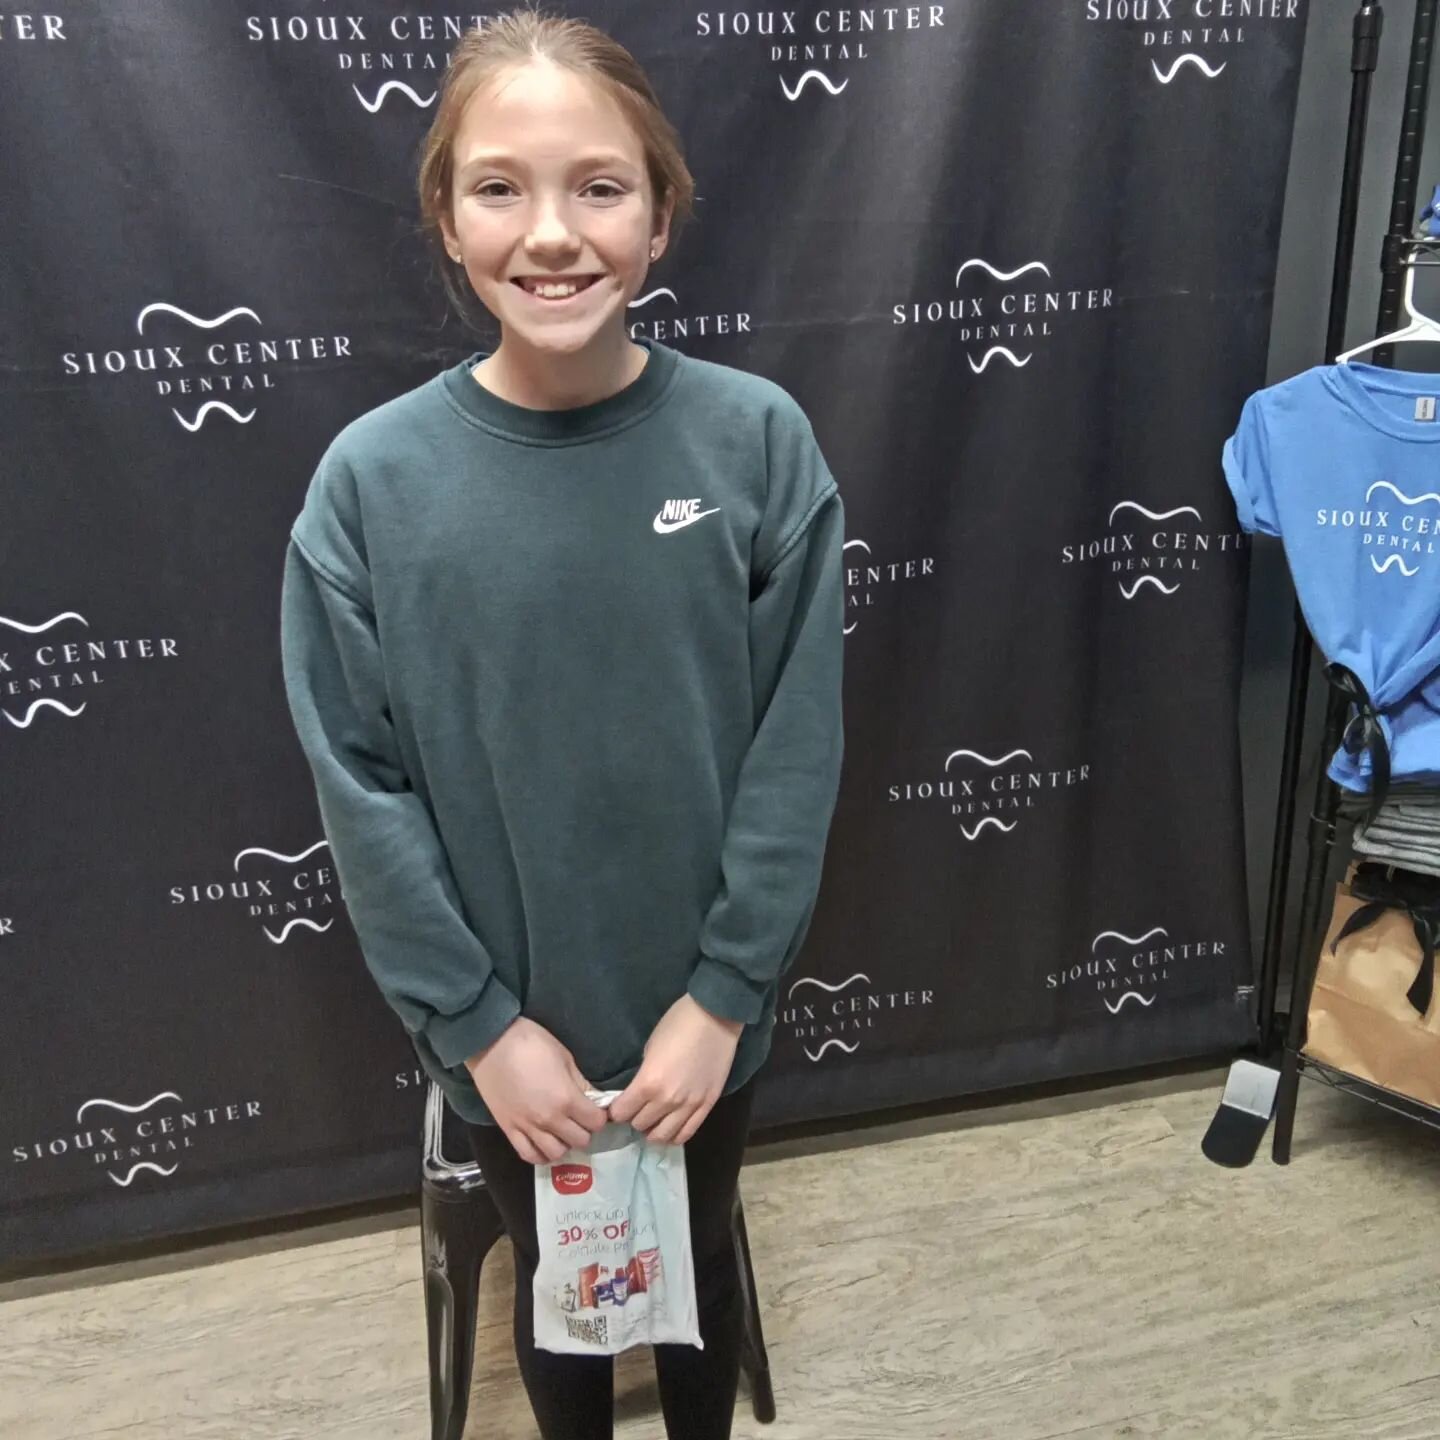 Tenley was in to see us and she had an awesome visit! 🎉 We are thrilled to report that she is a member of our ⭐No Cavity Club⭐! 🥇 Way to go, Tenley! 👏👏👏 Keep up the great brushing! 😎🦷👍
.
.
.
#siouxcenterdental 
#faithfamilyservice 
#generalde